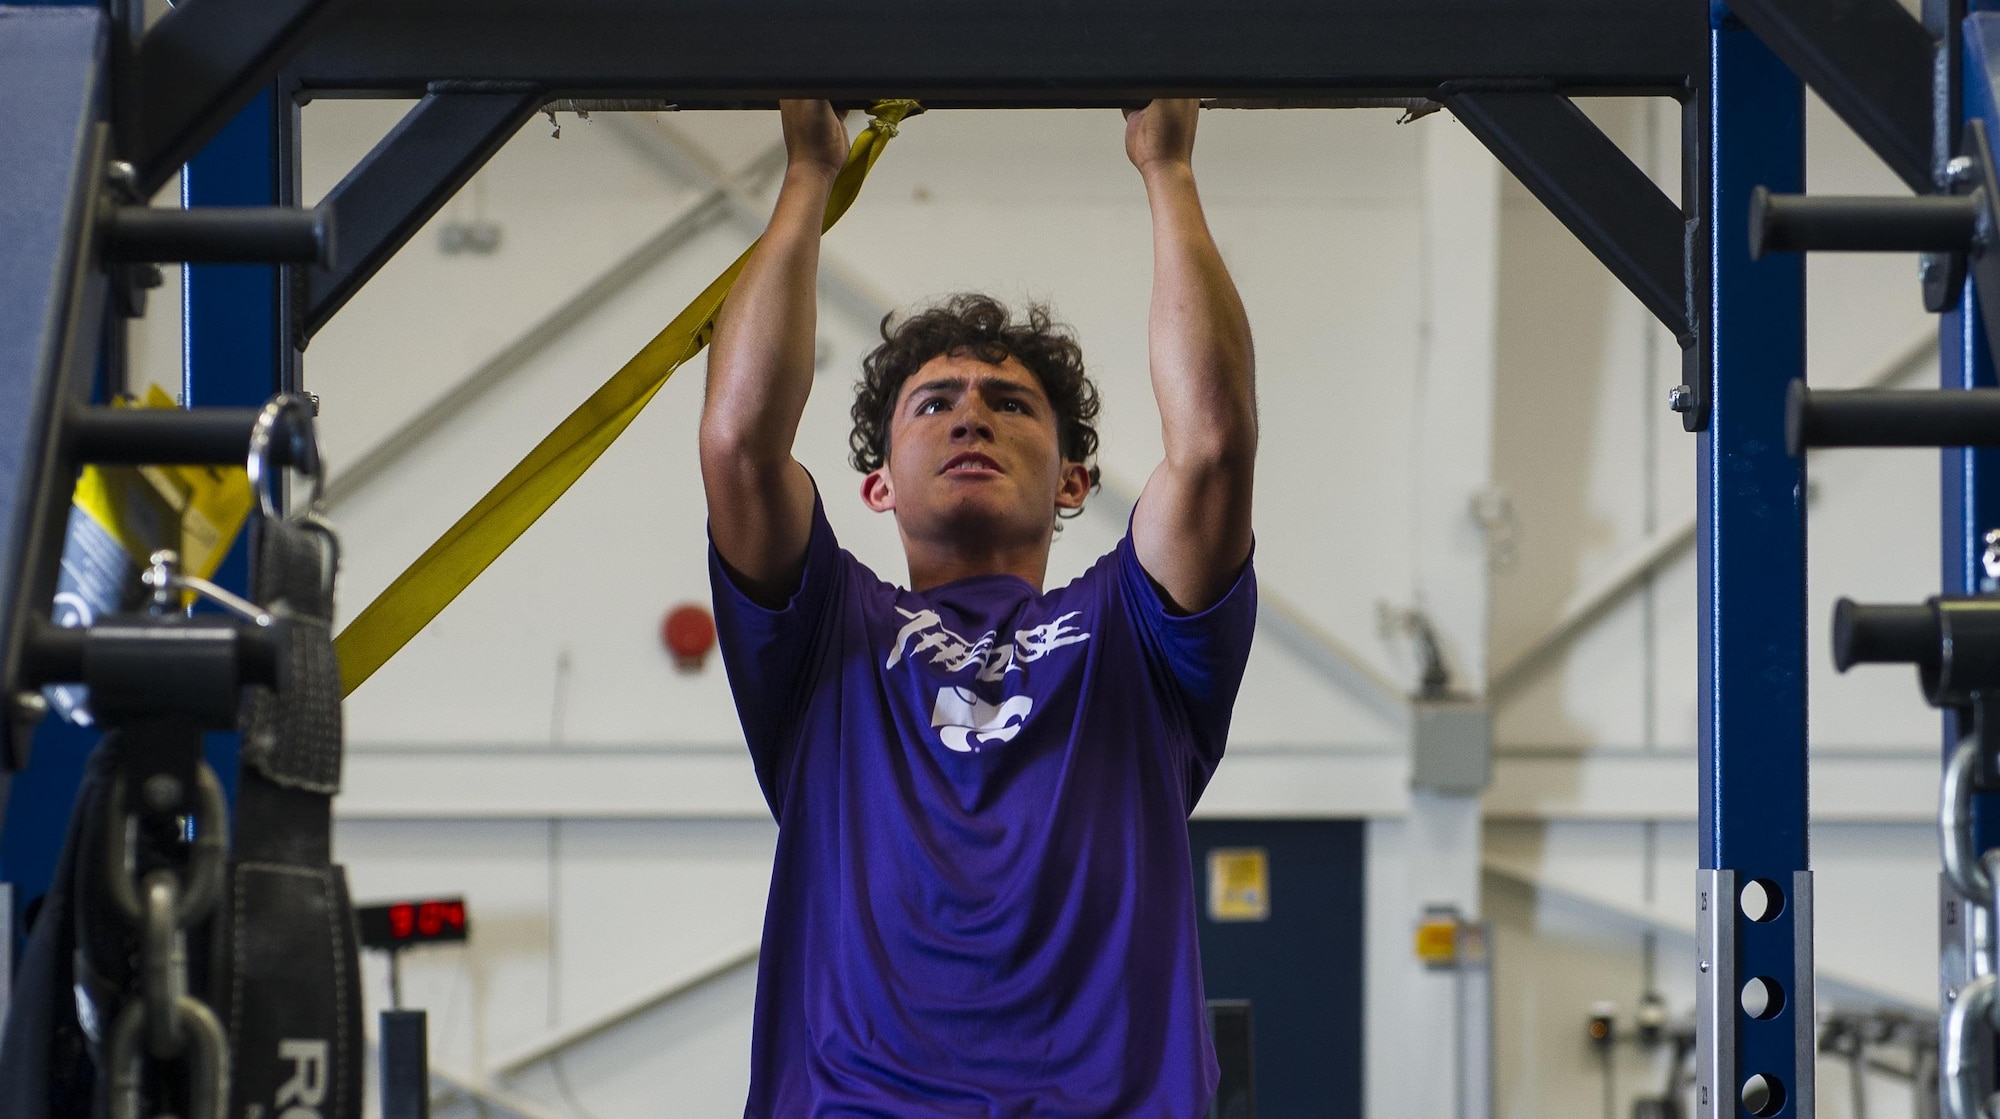 A Clovis High School football player exercises at the 26th Special Tactics Squadron’s gymnasium during his team’s tour at Cannon Air Force Base, NM, July 19, 2017. The students, currently in their pre-season form, endured the rigorous regimen that 26th STS Airmen follow to maintain mission readiness. (U.S. Air Force photo by Senior Airman Lane T. Plummer)